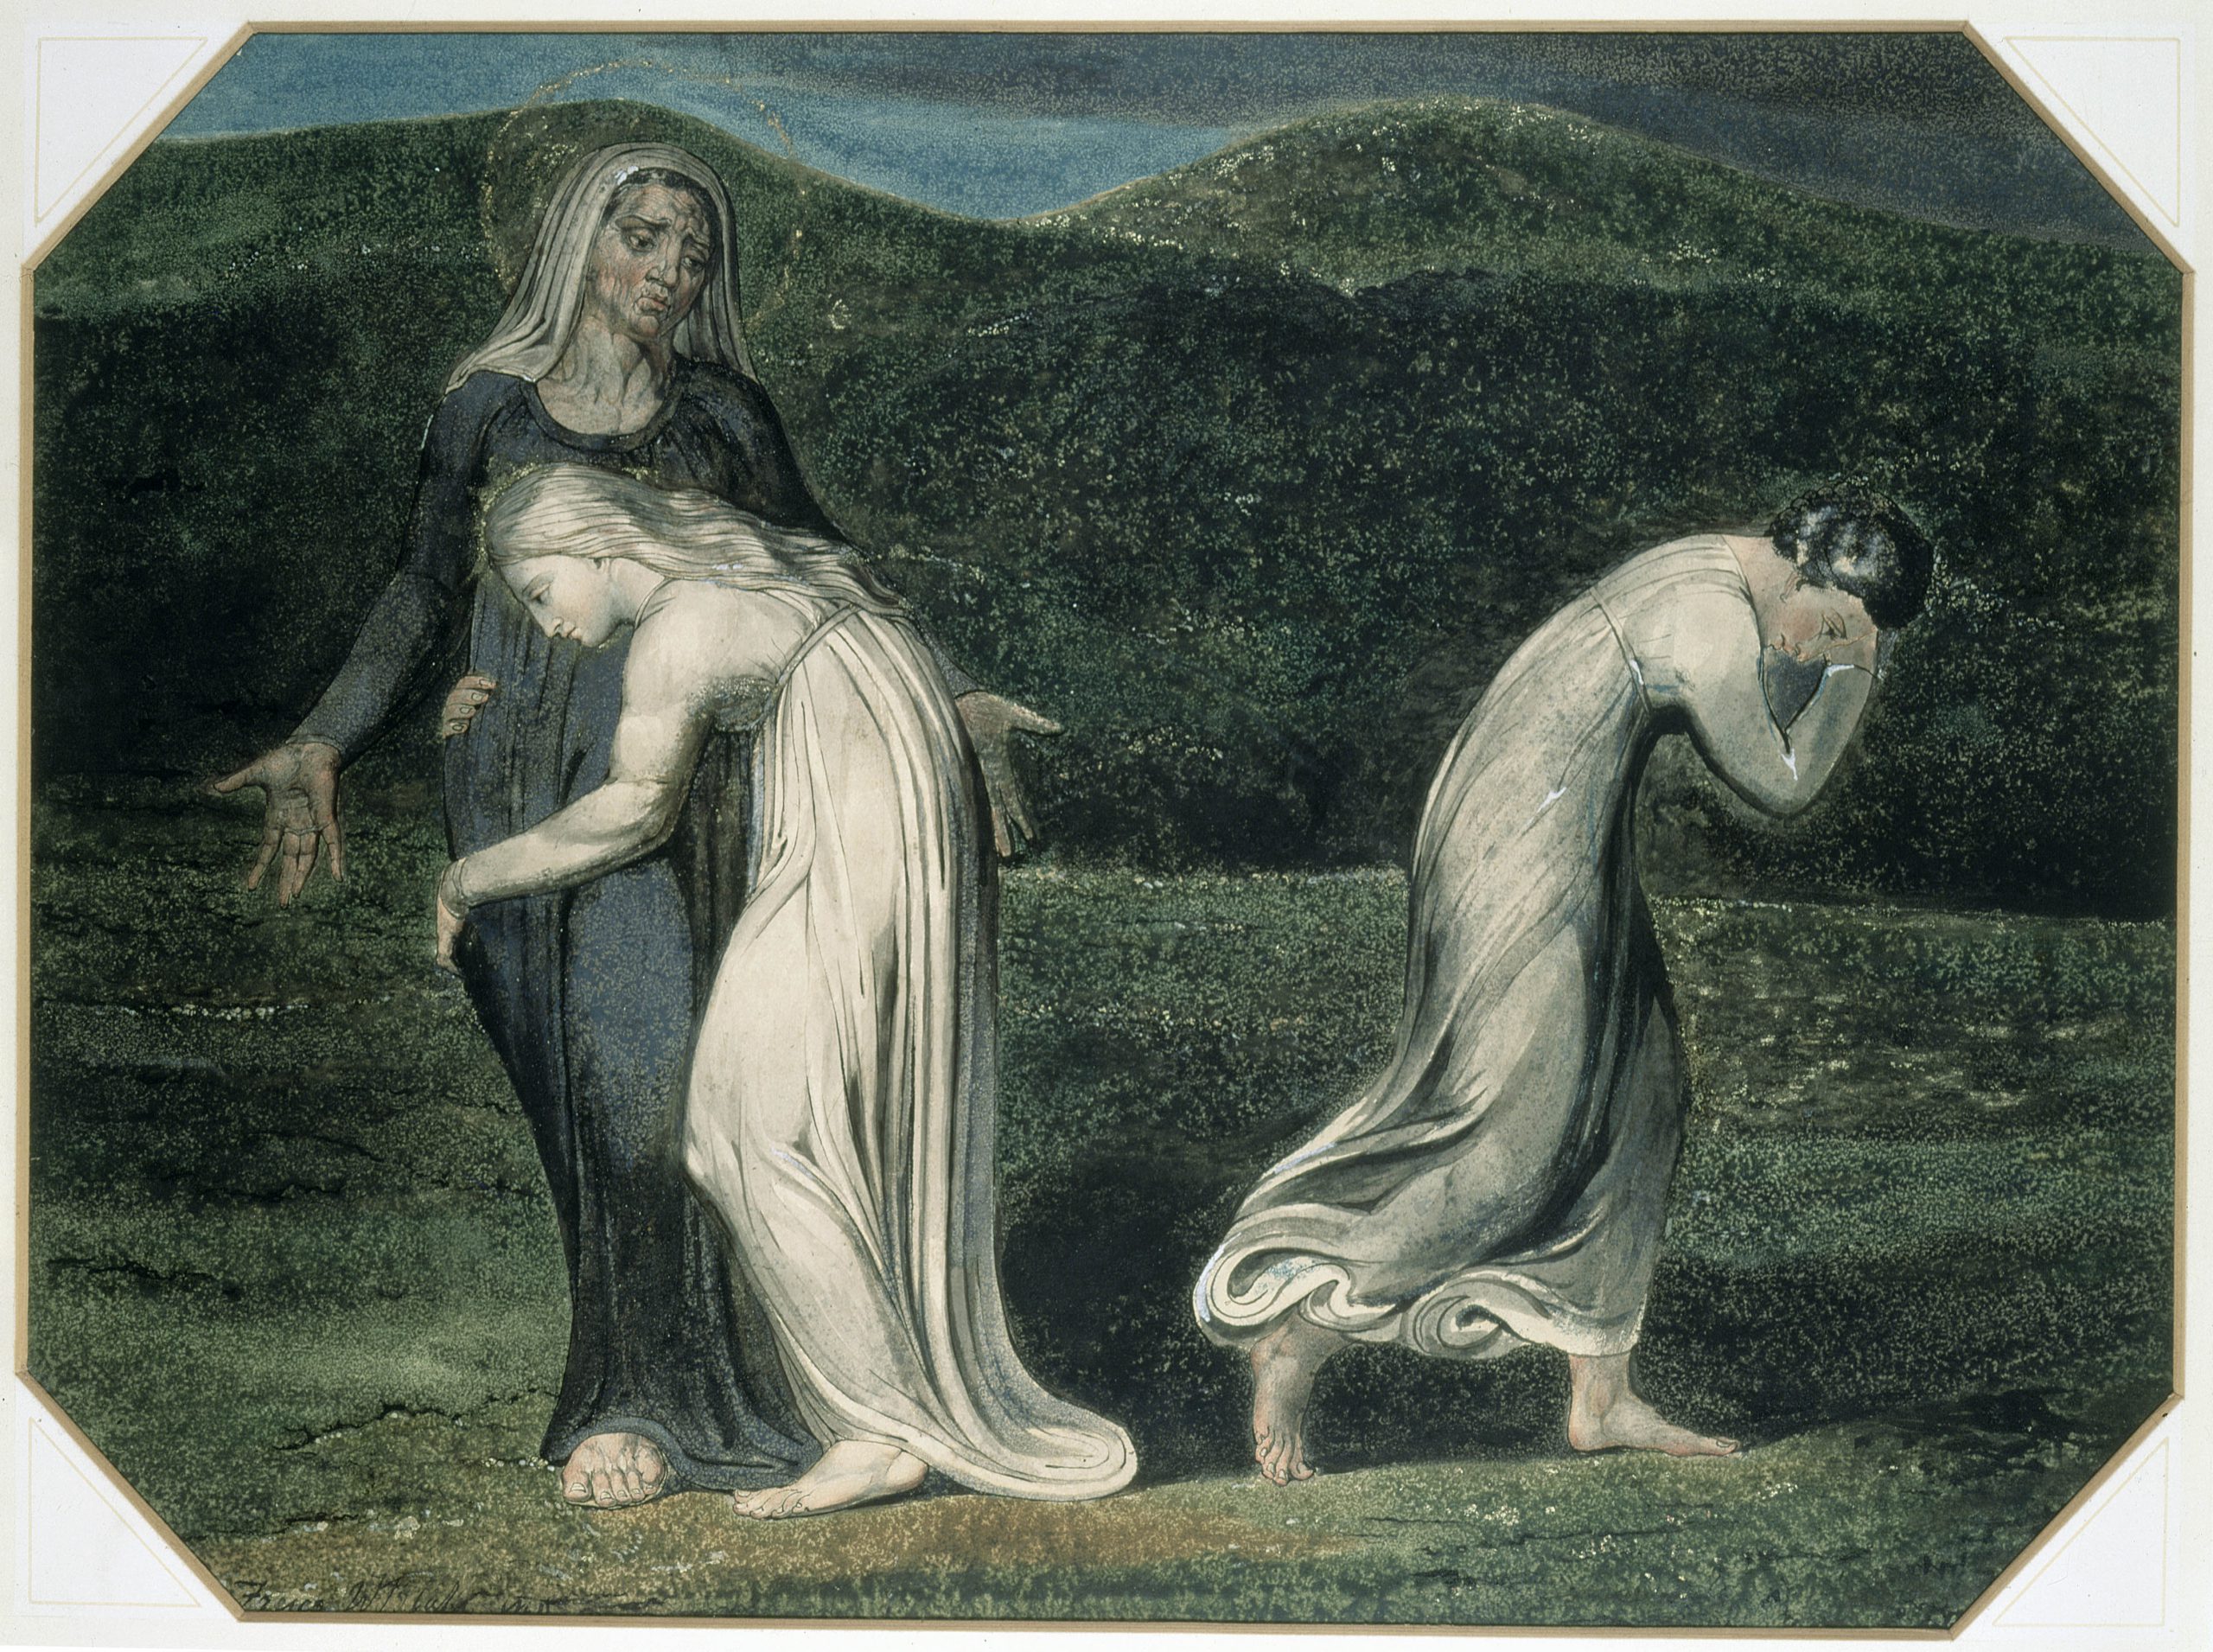 Naomi Entreating Ruth and Orpah to Return to the Land of Moab, William Blake, 1795.